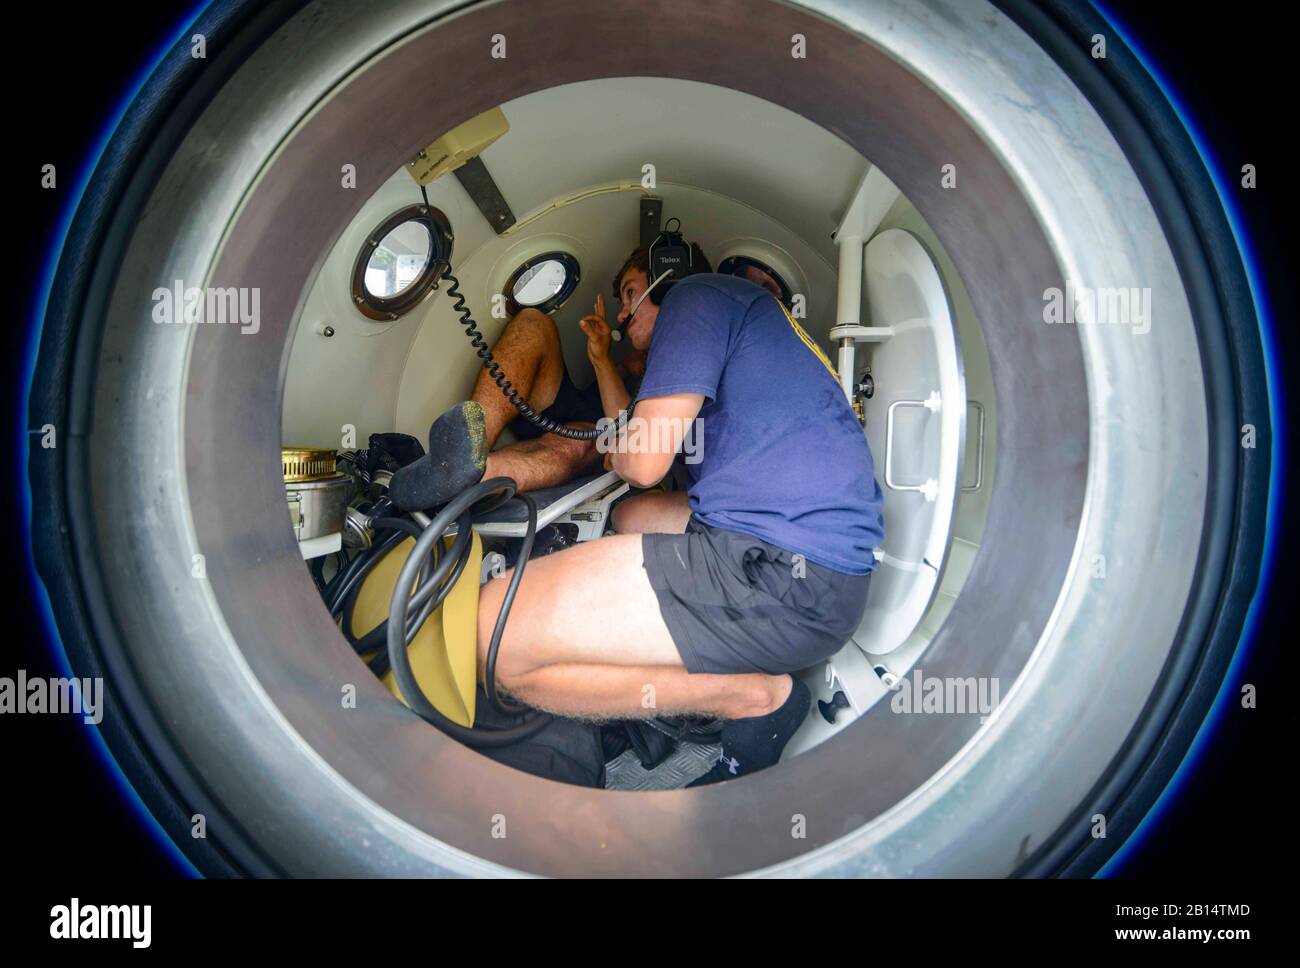 U.S. Navy Diver 2nd Class David Loofbourow, assigned to Mobile Diving and Salvage Unit One (MDSU 1), conducts recompression chamber familiarization training with Honduran divers at Base de Naval Puerto Castilla, Honduras, Aug. 2, 2017, in support of Southern Partnership Station 17. SPS 17 is a U.S. Navy deployment, executed by U.S. Naval Forces Southern Command/U.S. 4th Fleet, focused on subject matter expert exchanges with partner nation militaries and security forces in Central and South America. (U.S. Navy photo by Mass Communication Specialist 3rd Class Kristen Cheyenne Yarber/Released) Stock Photo